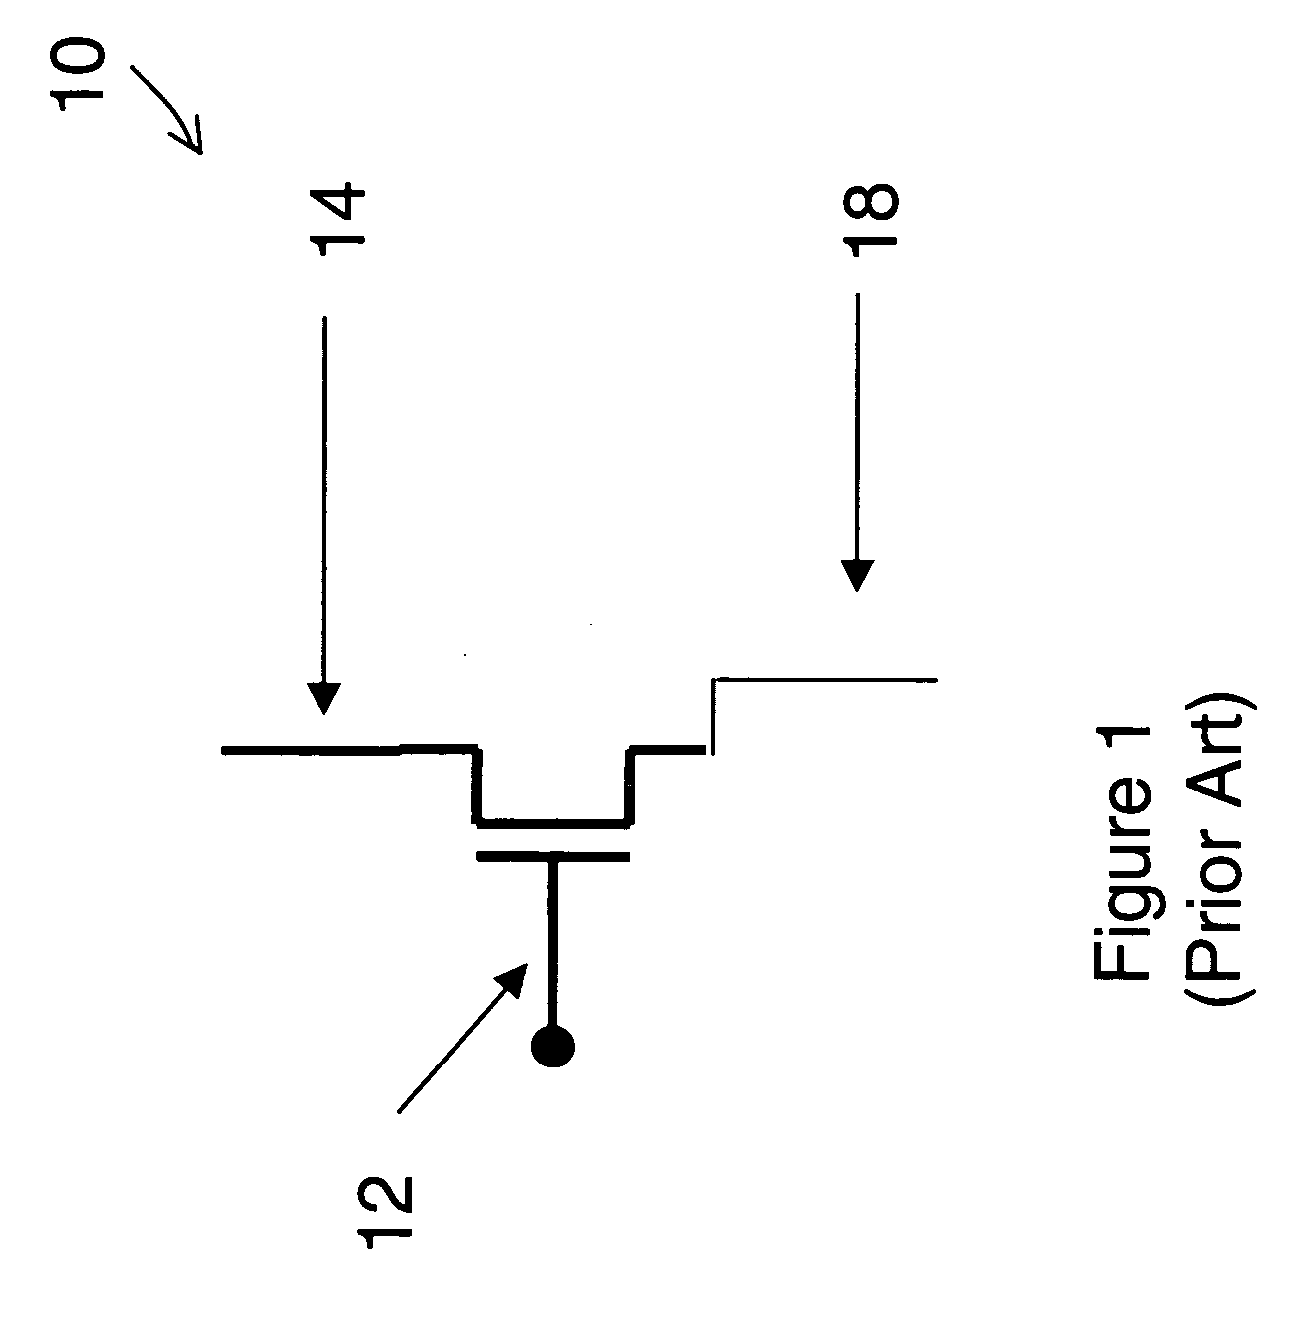 Non-volatile electromechanical field effect devices and circuits using same and methods of forming same